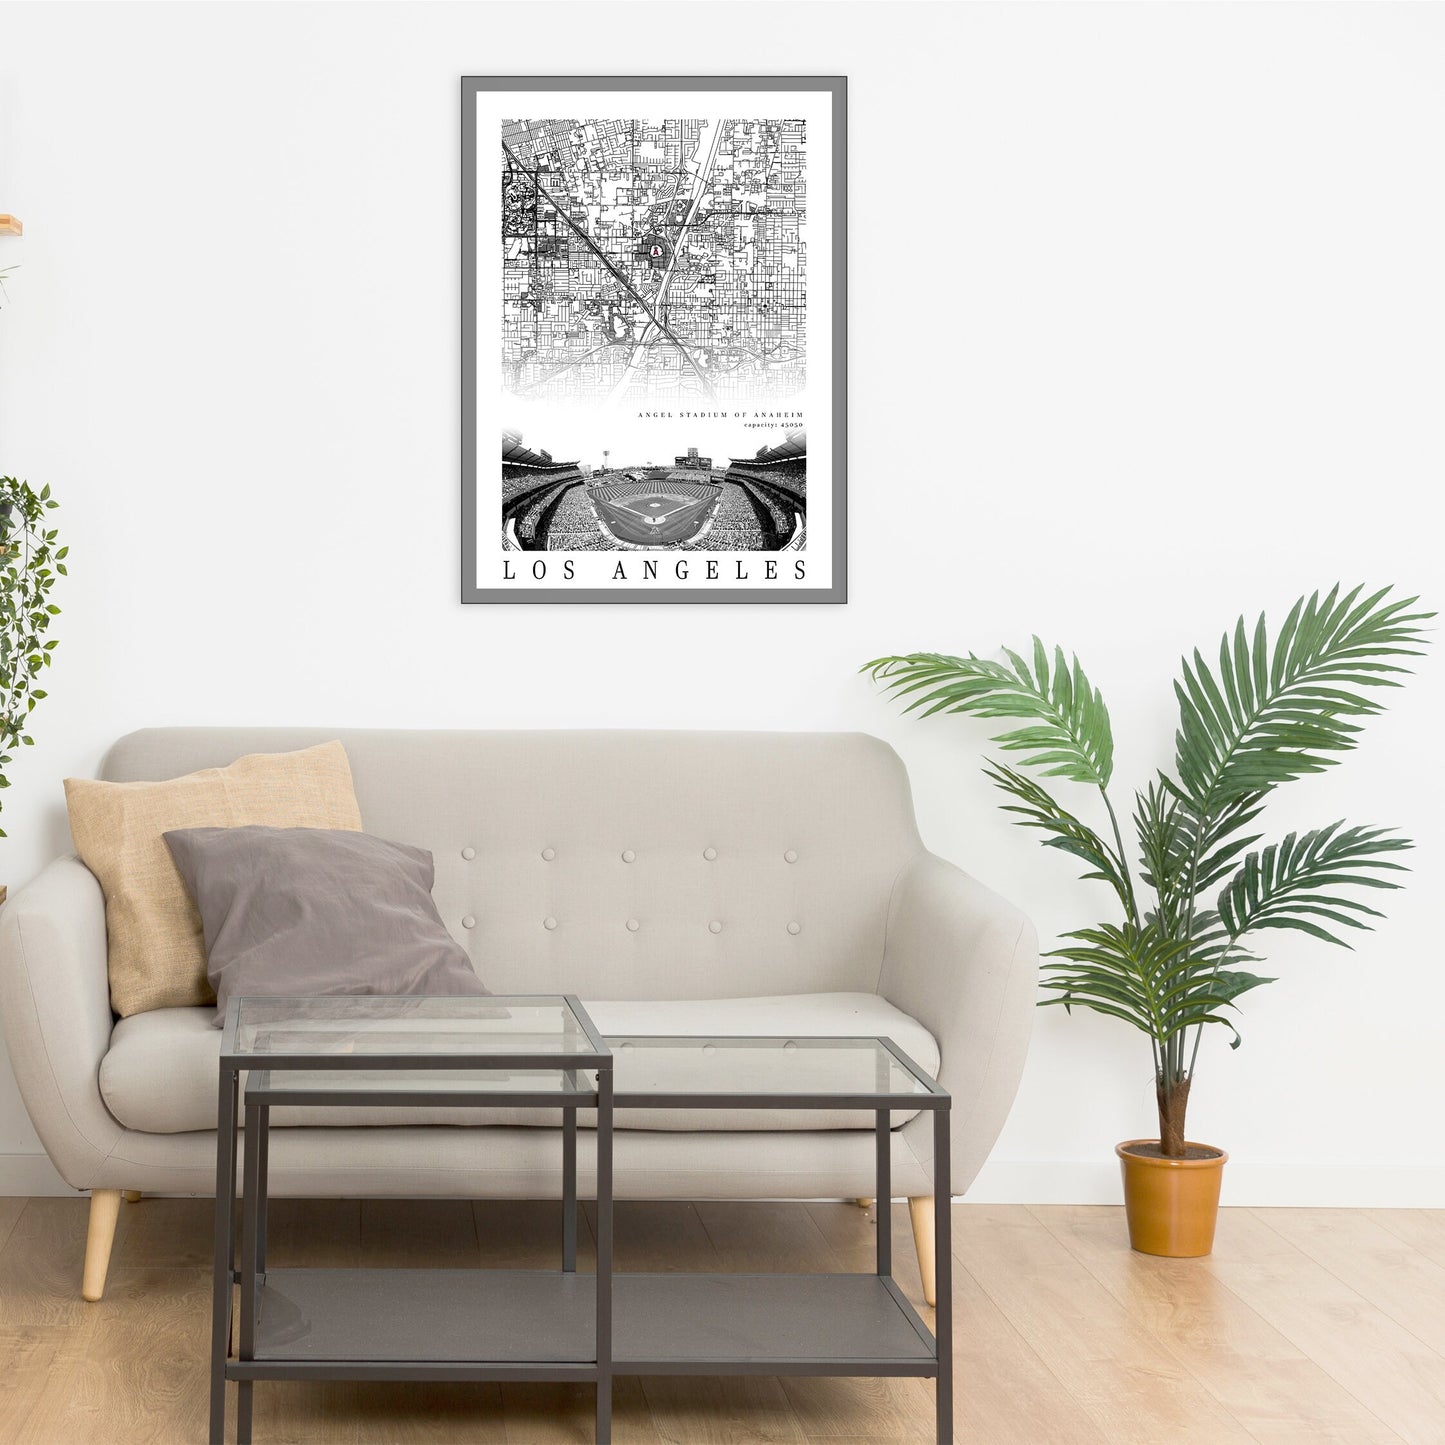 City map of LOS ANGELES - Angel Stadium of Anaheim -Home Decor Los Angeles -Angel Stadium of Anaheim wall decor -New York poster - Print map